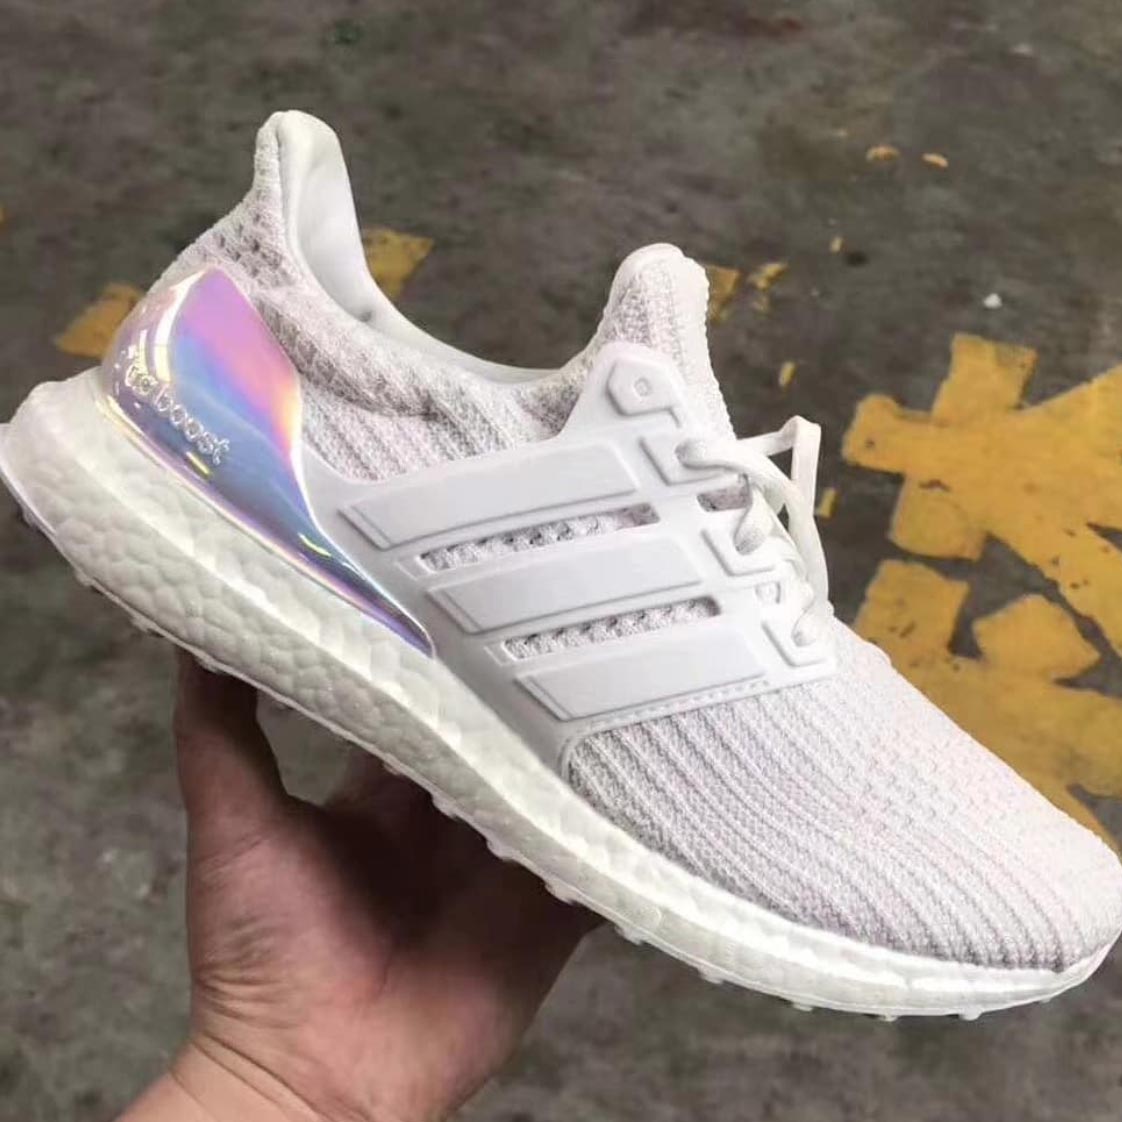 The adidas Ultra Boost 4.0 Surfaces 